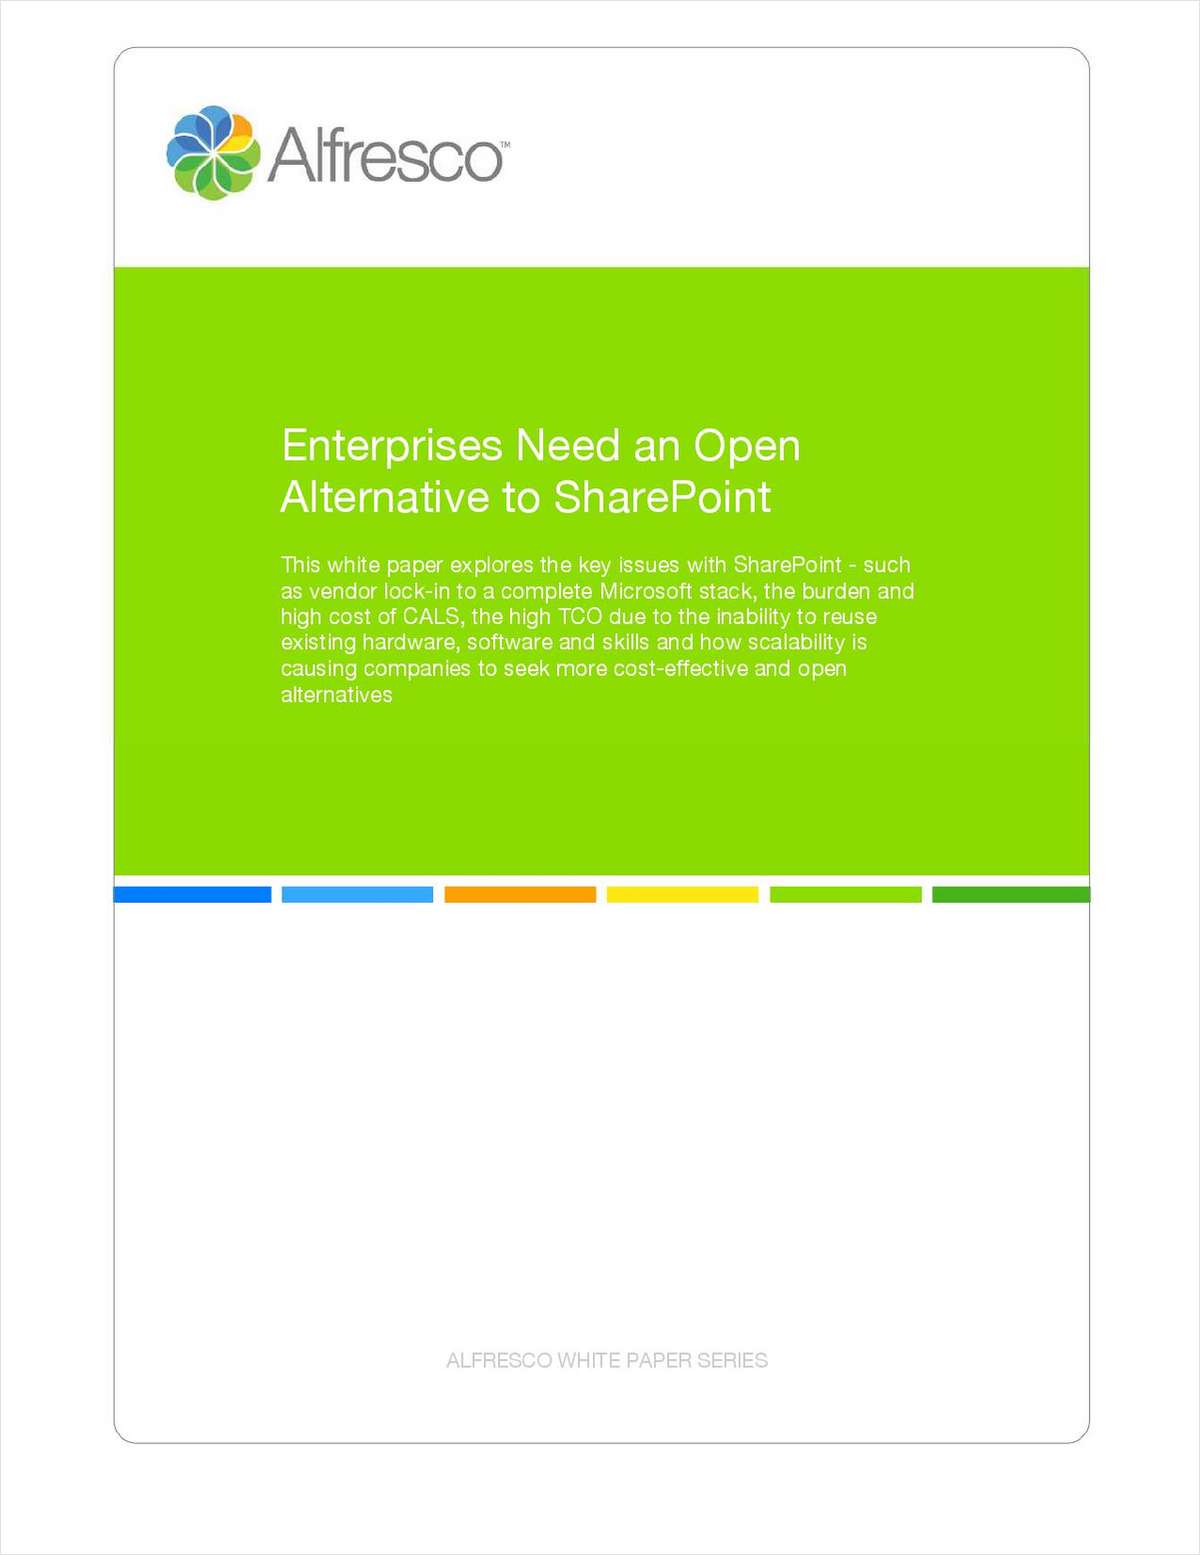 Why Enterprises Need an Open Alternative to SharePoint